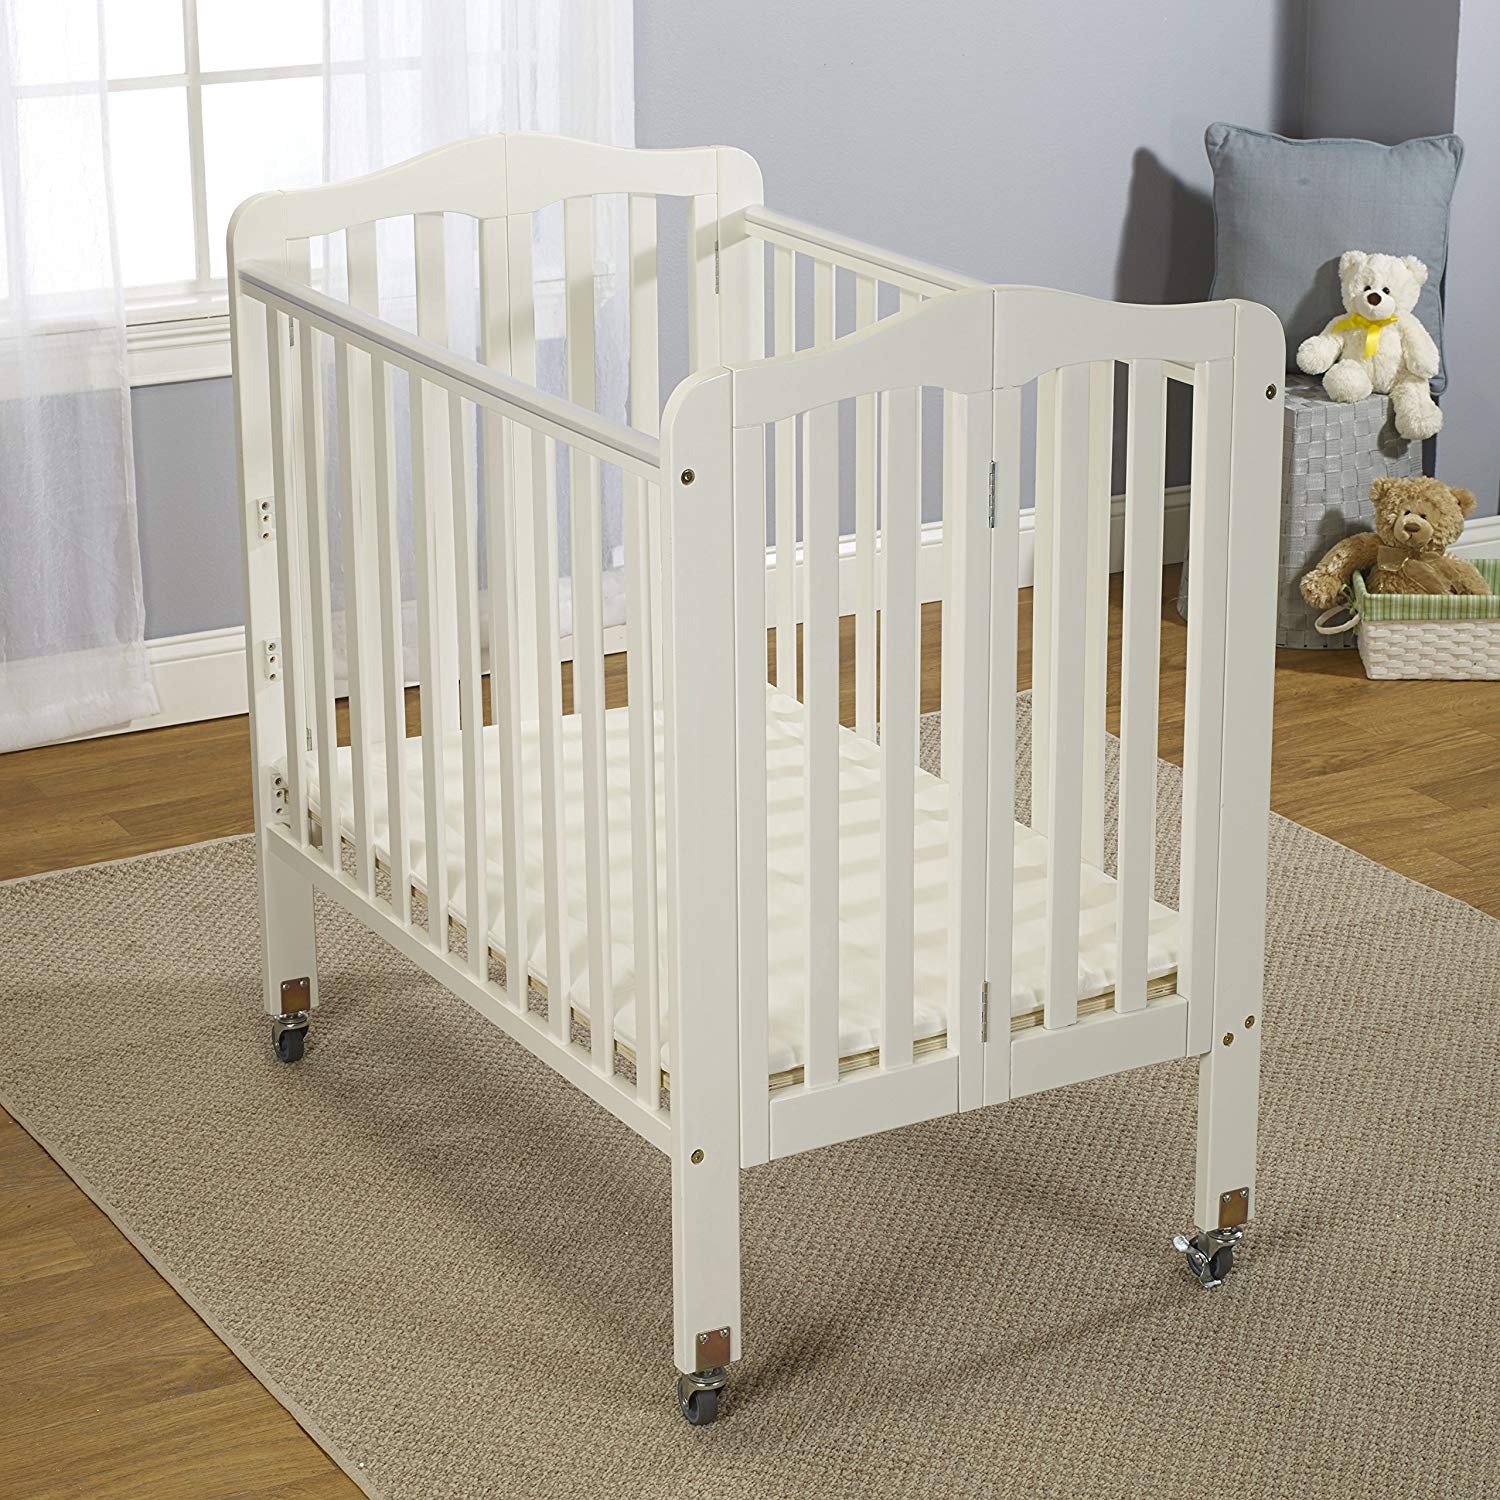 curved mattress for baby